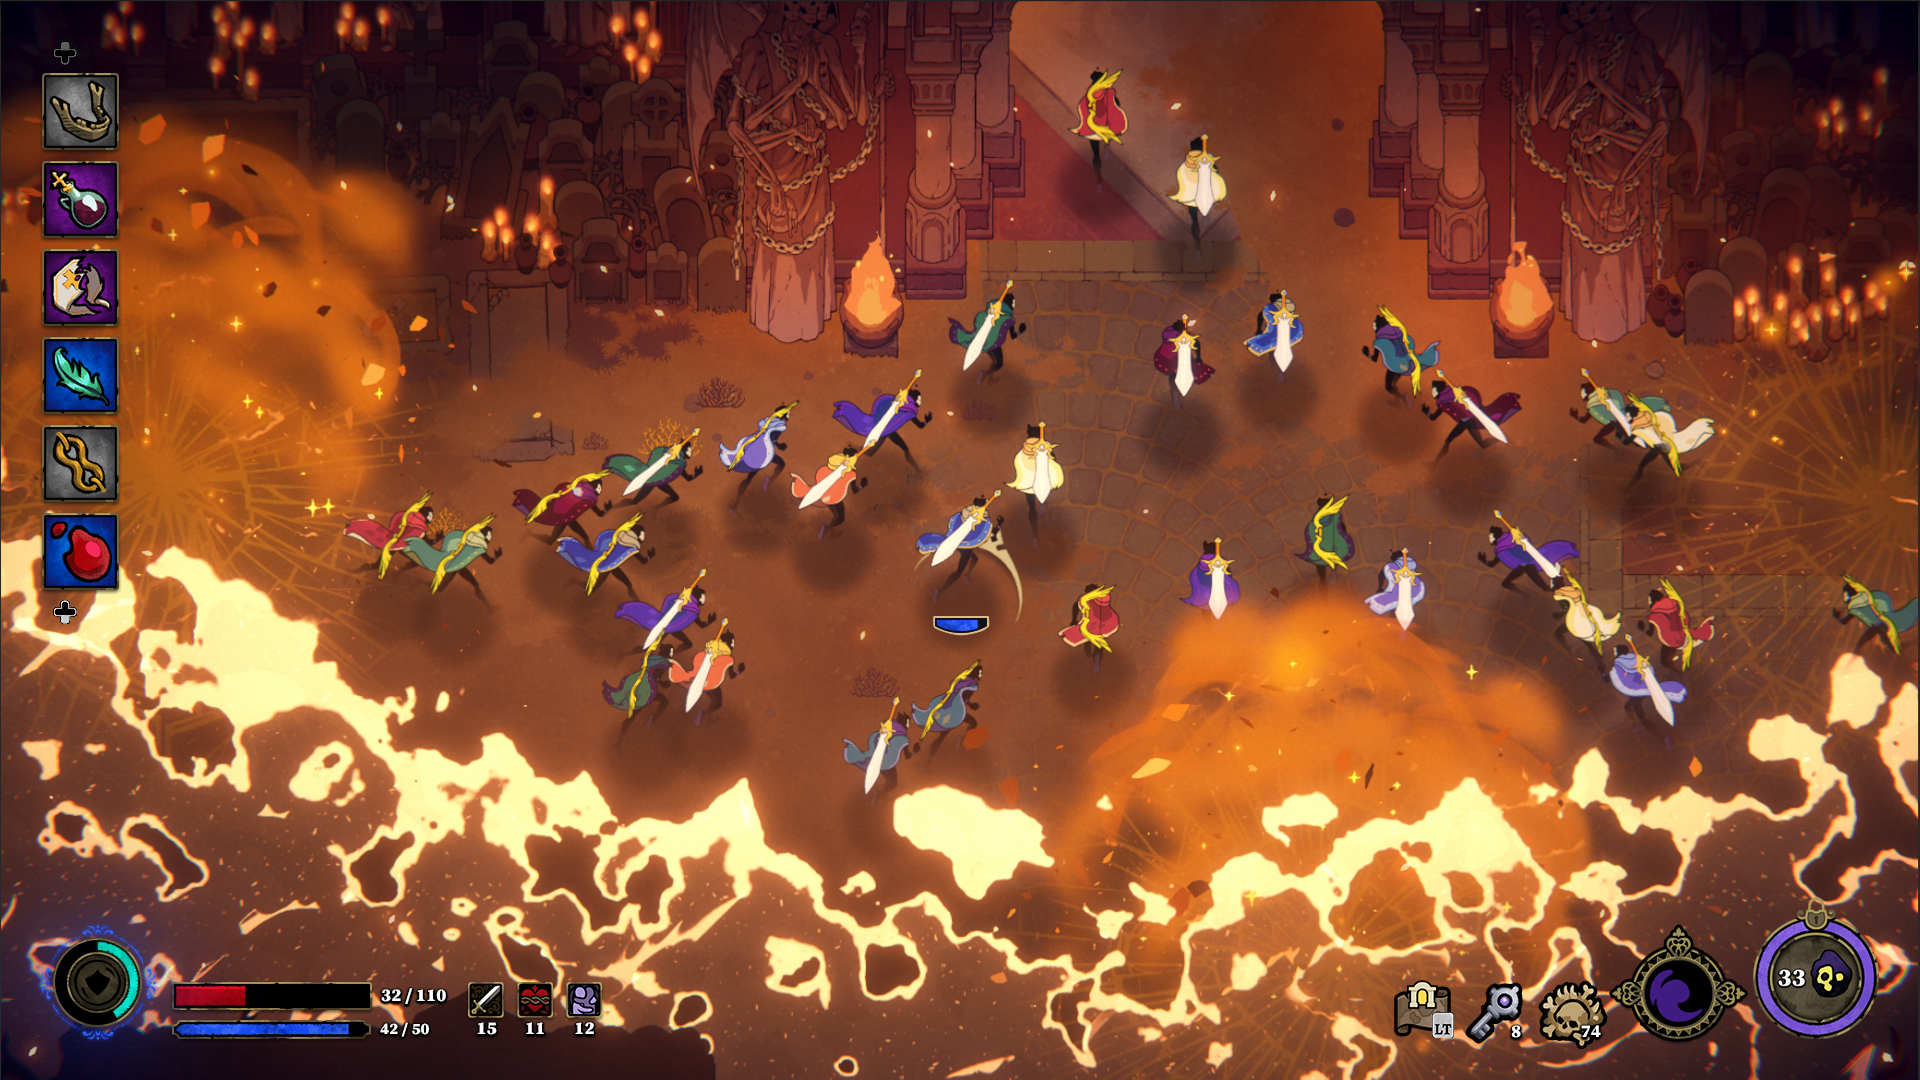 Thunder Lotus Games announces roguelike action game 33 Immortals for Xbox  Series, PC - Gematsu